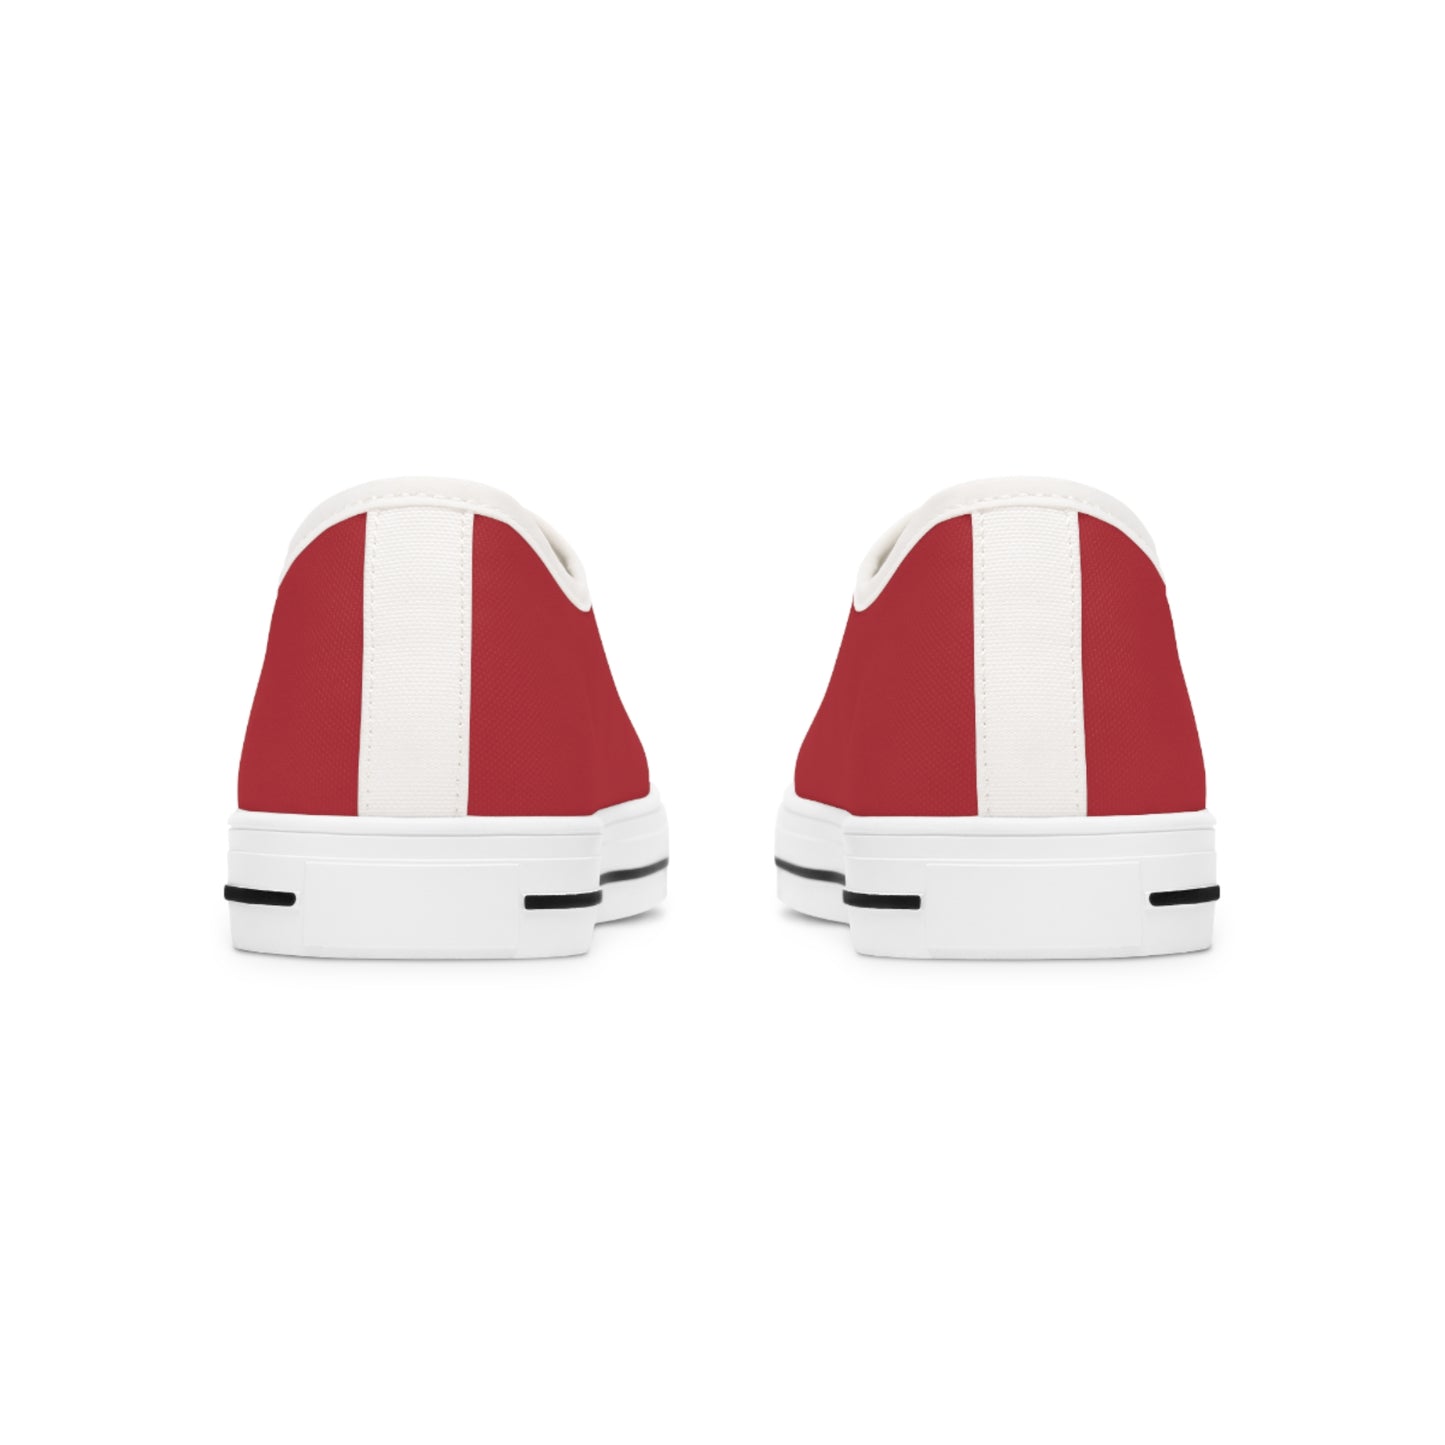 Women's Low Top Sneakers - Red US 12 White sole